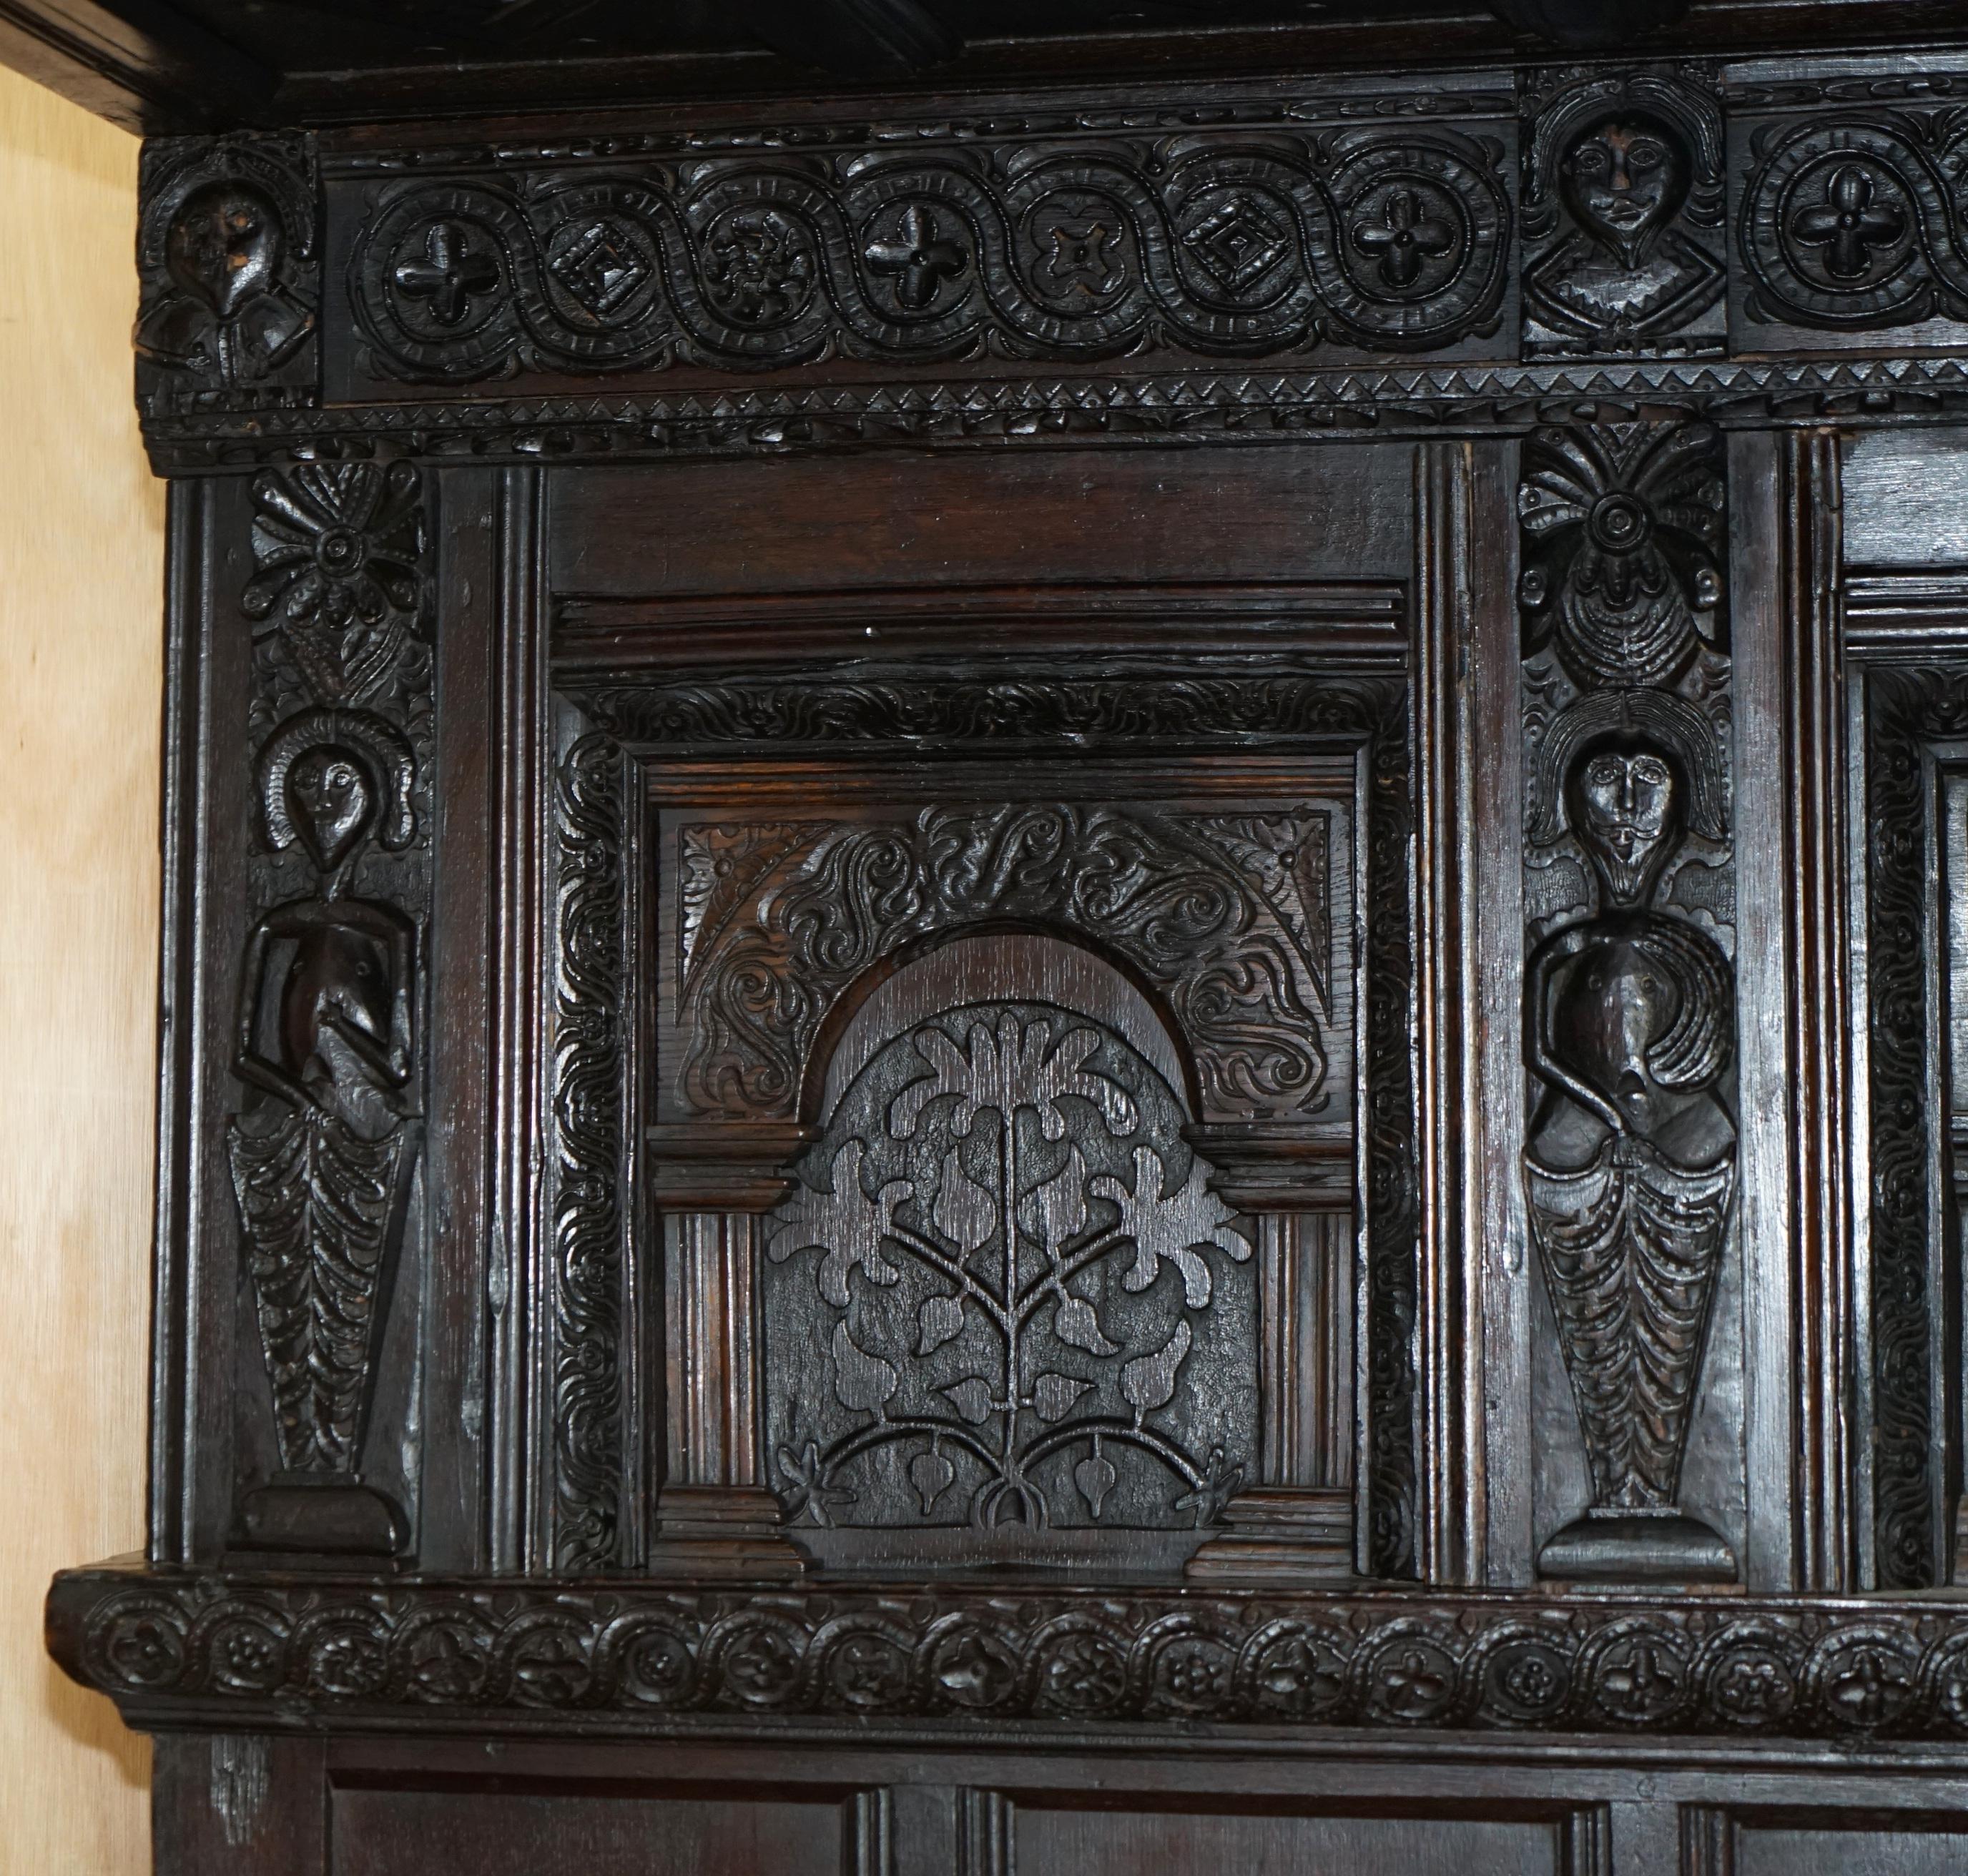 Hand-Crafted 17TH CENTURY JACOBEAN WILLIAM III CIRCA 1650 ENGLiSH OAK TESTER FOUR POSTER BED For Sale